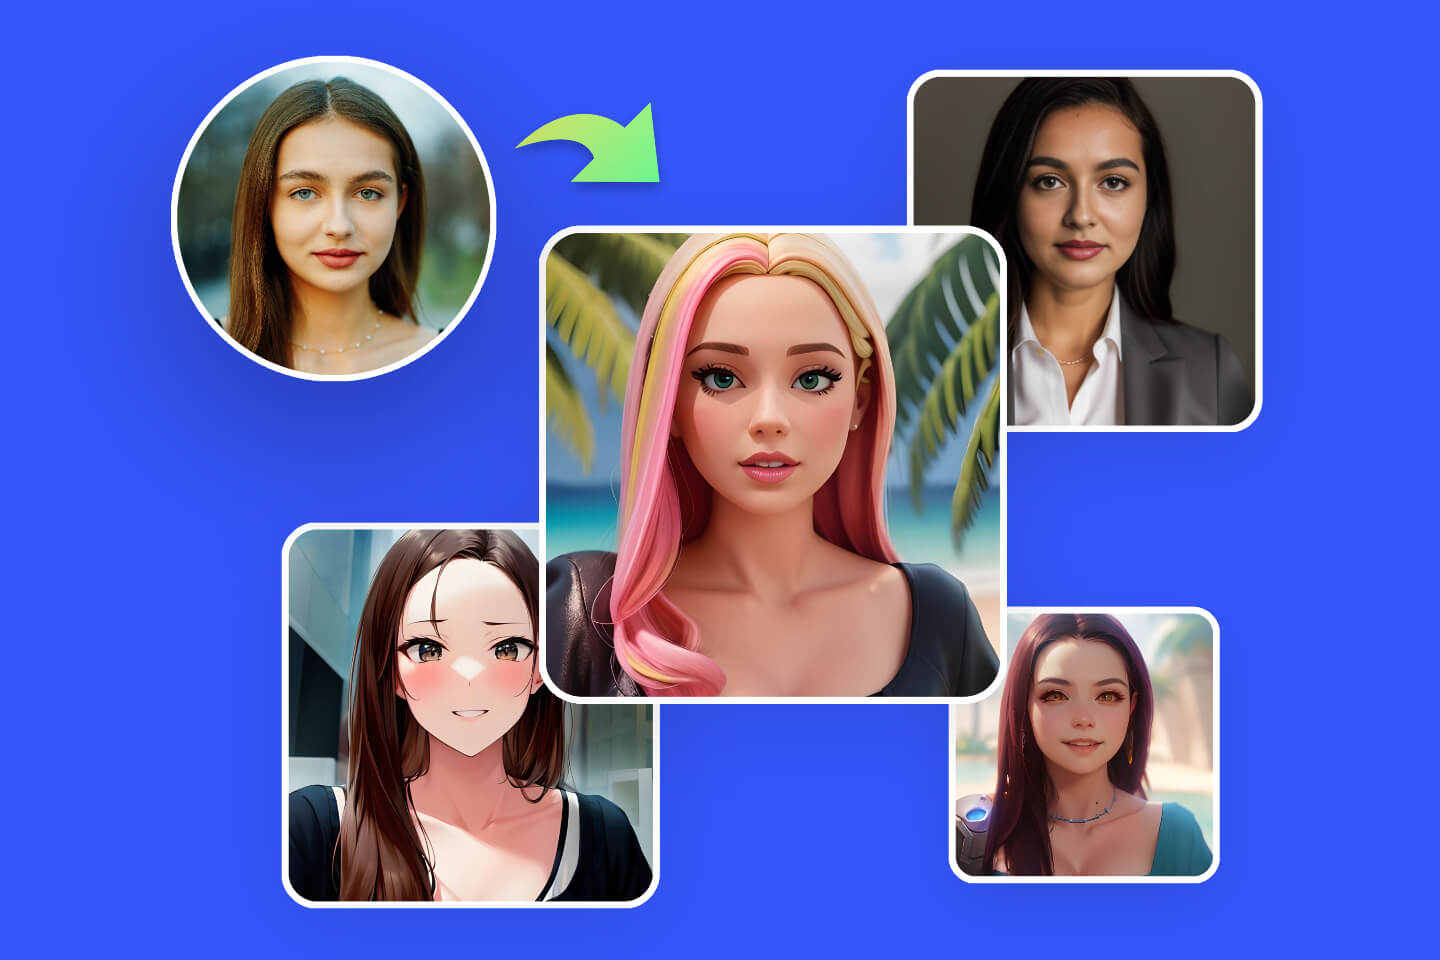 Convert a girl portrait to different styles of AI avatars with Fotor AI face filter